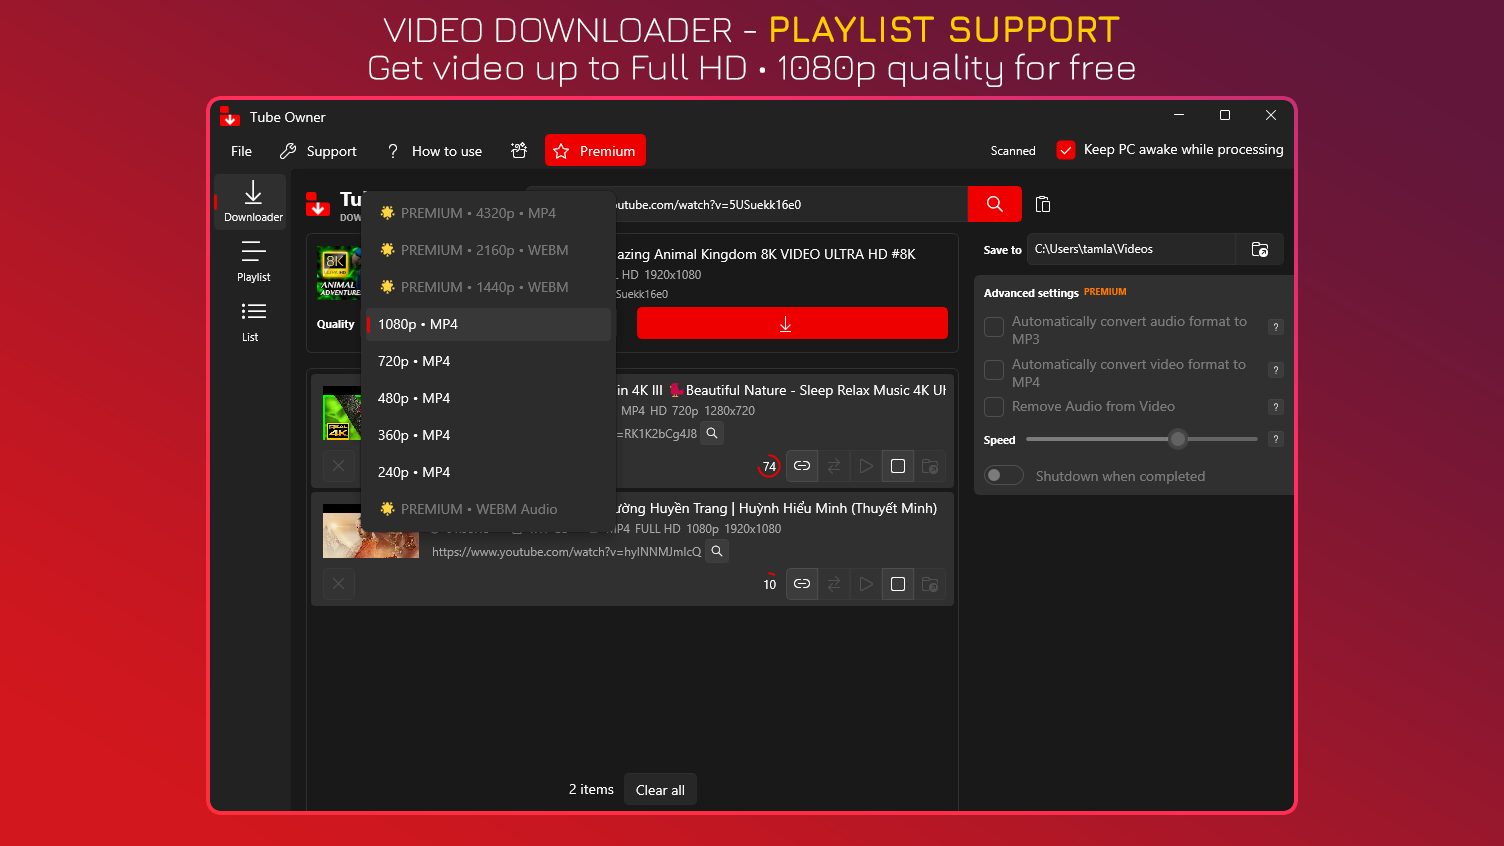 Video Downloader - Playlist Support - Get video in Full HD - 1080p quality for free